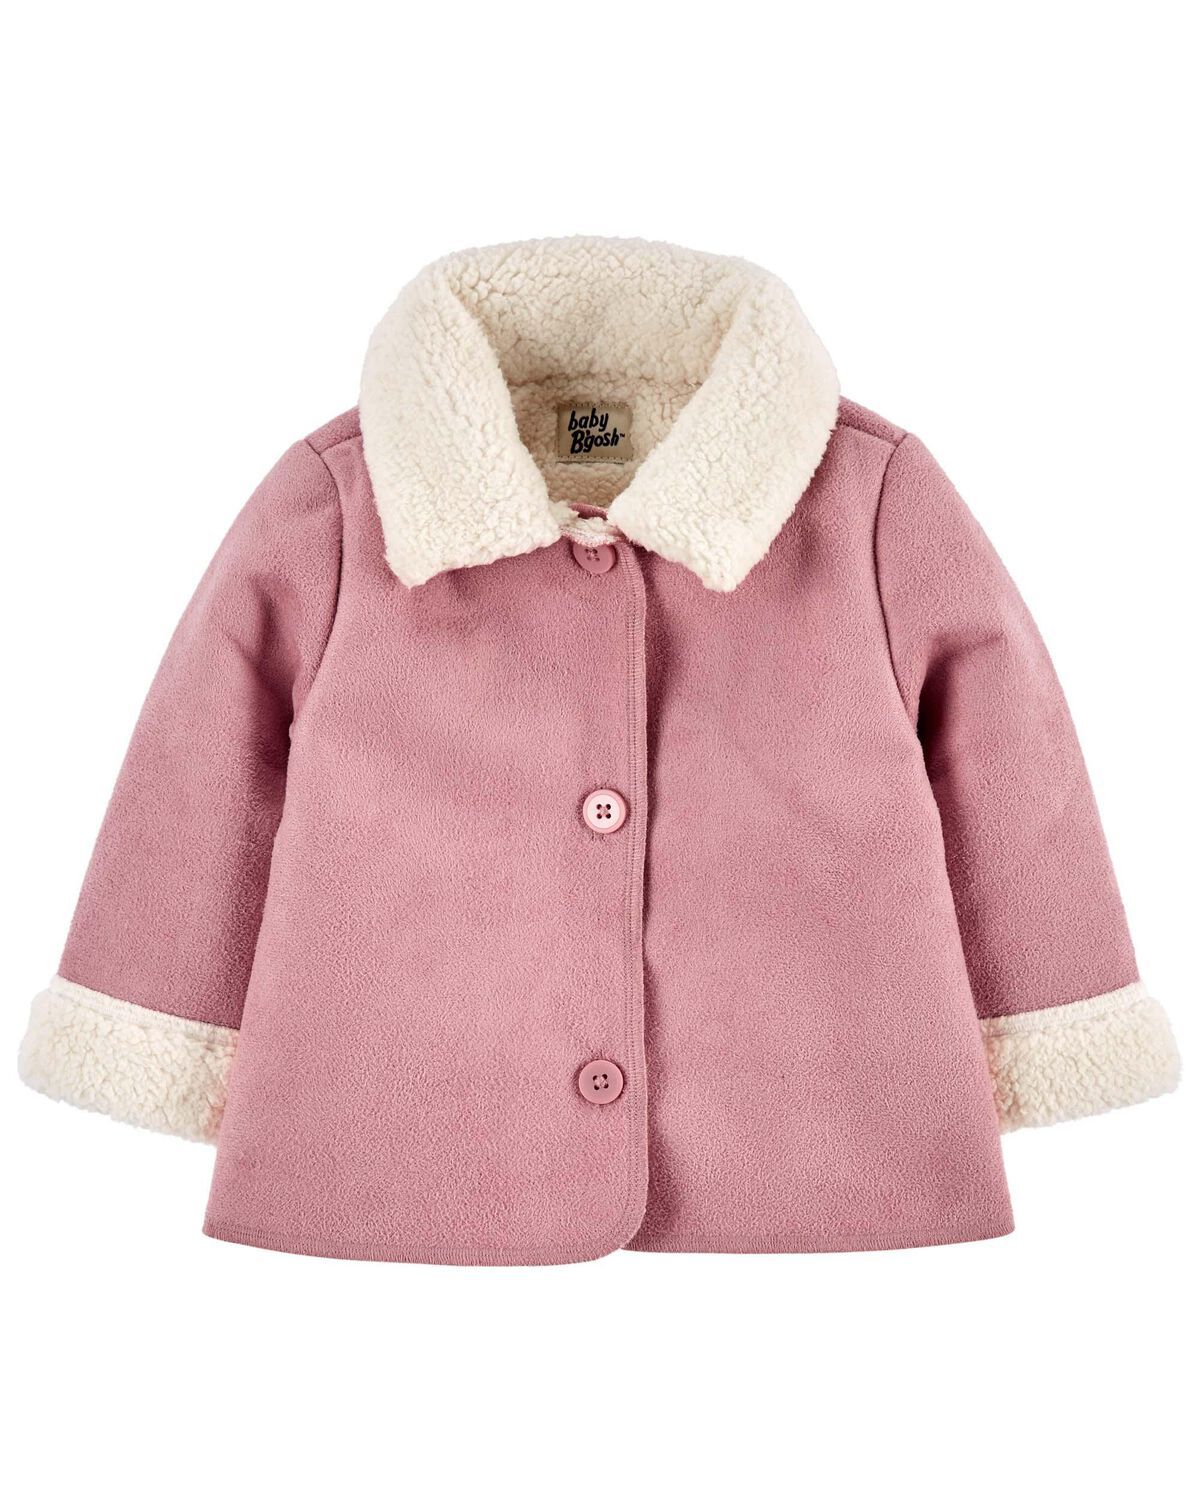 Pink Baby Sherpa Faux Suede Jacket | carters.com | Carter's